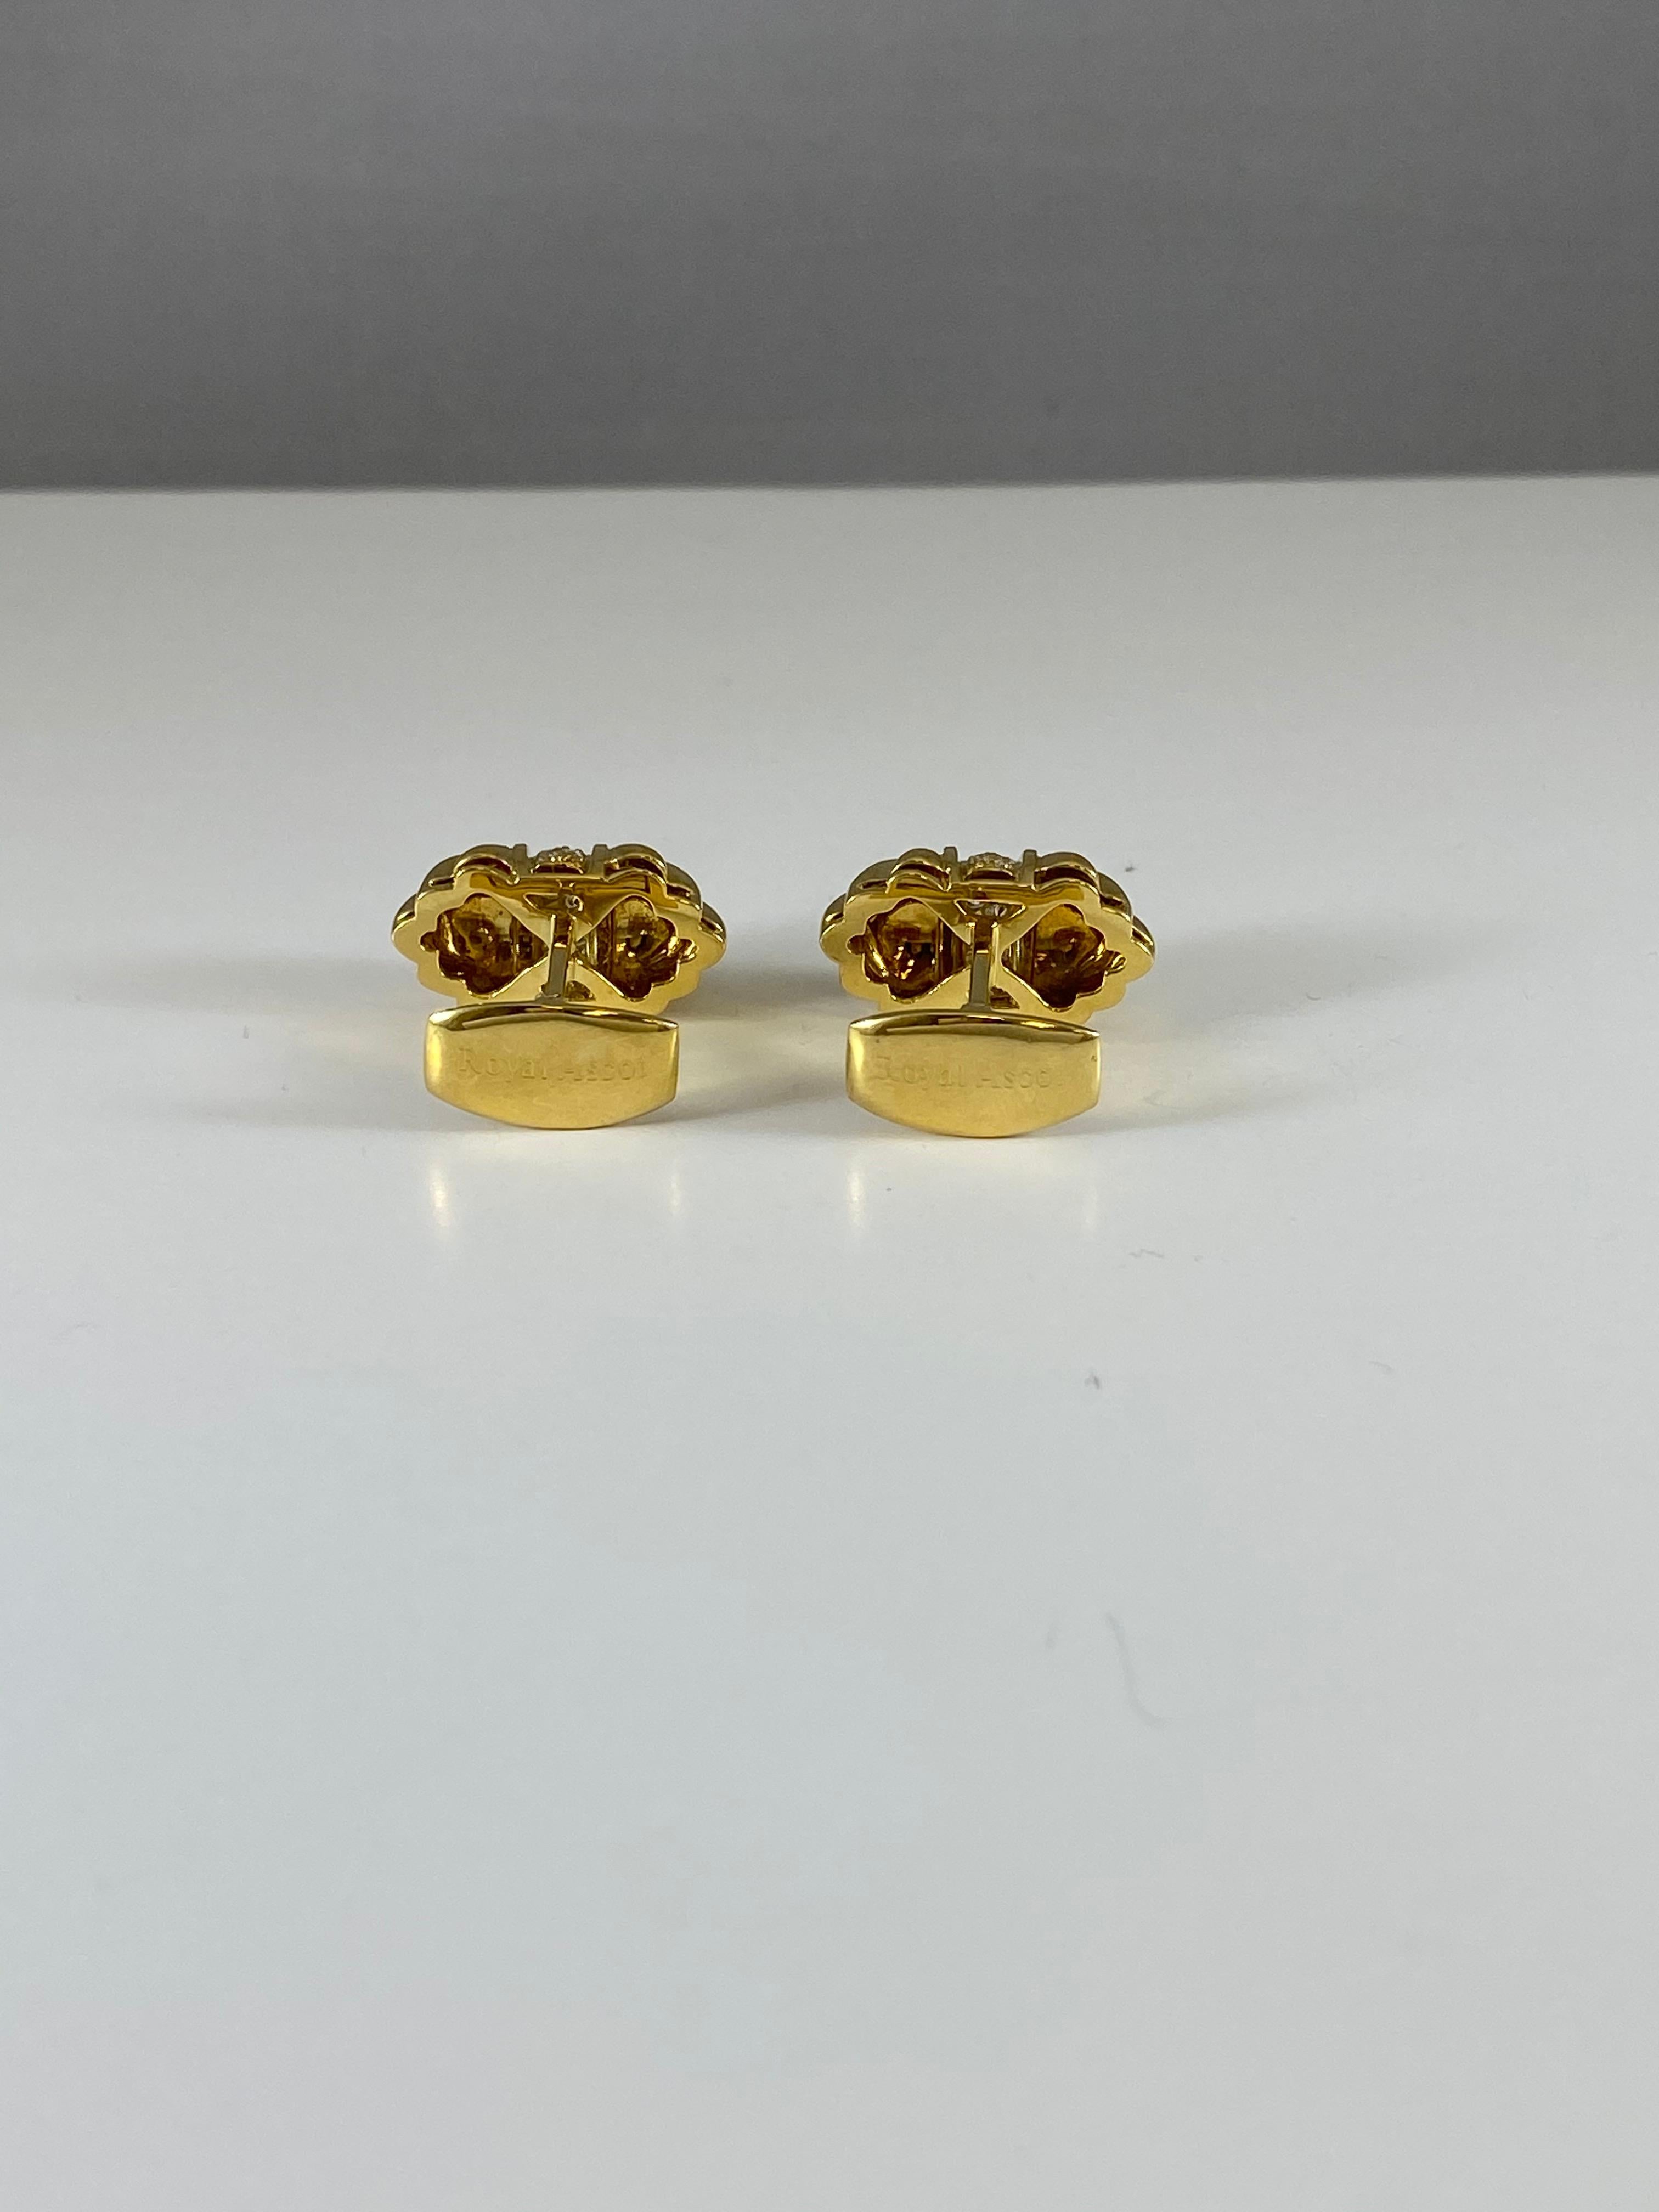 Hammerman Brothers Royal Ascot Diamond Cufflinks In New Condition For Sale In New York, NY